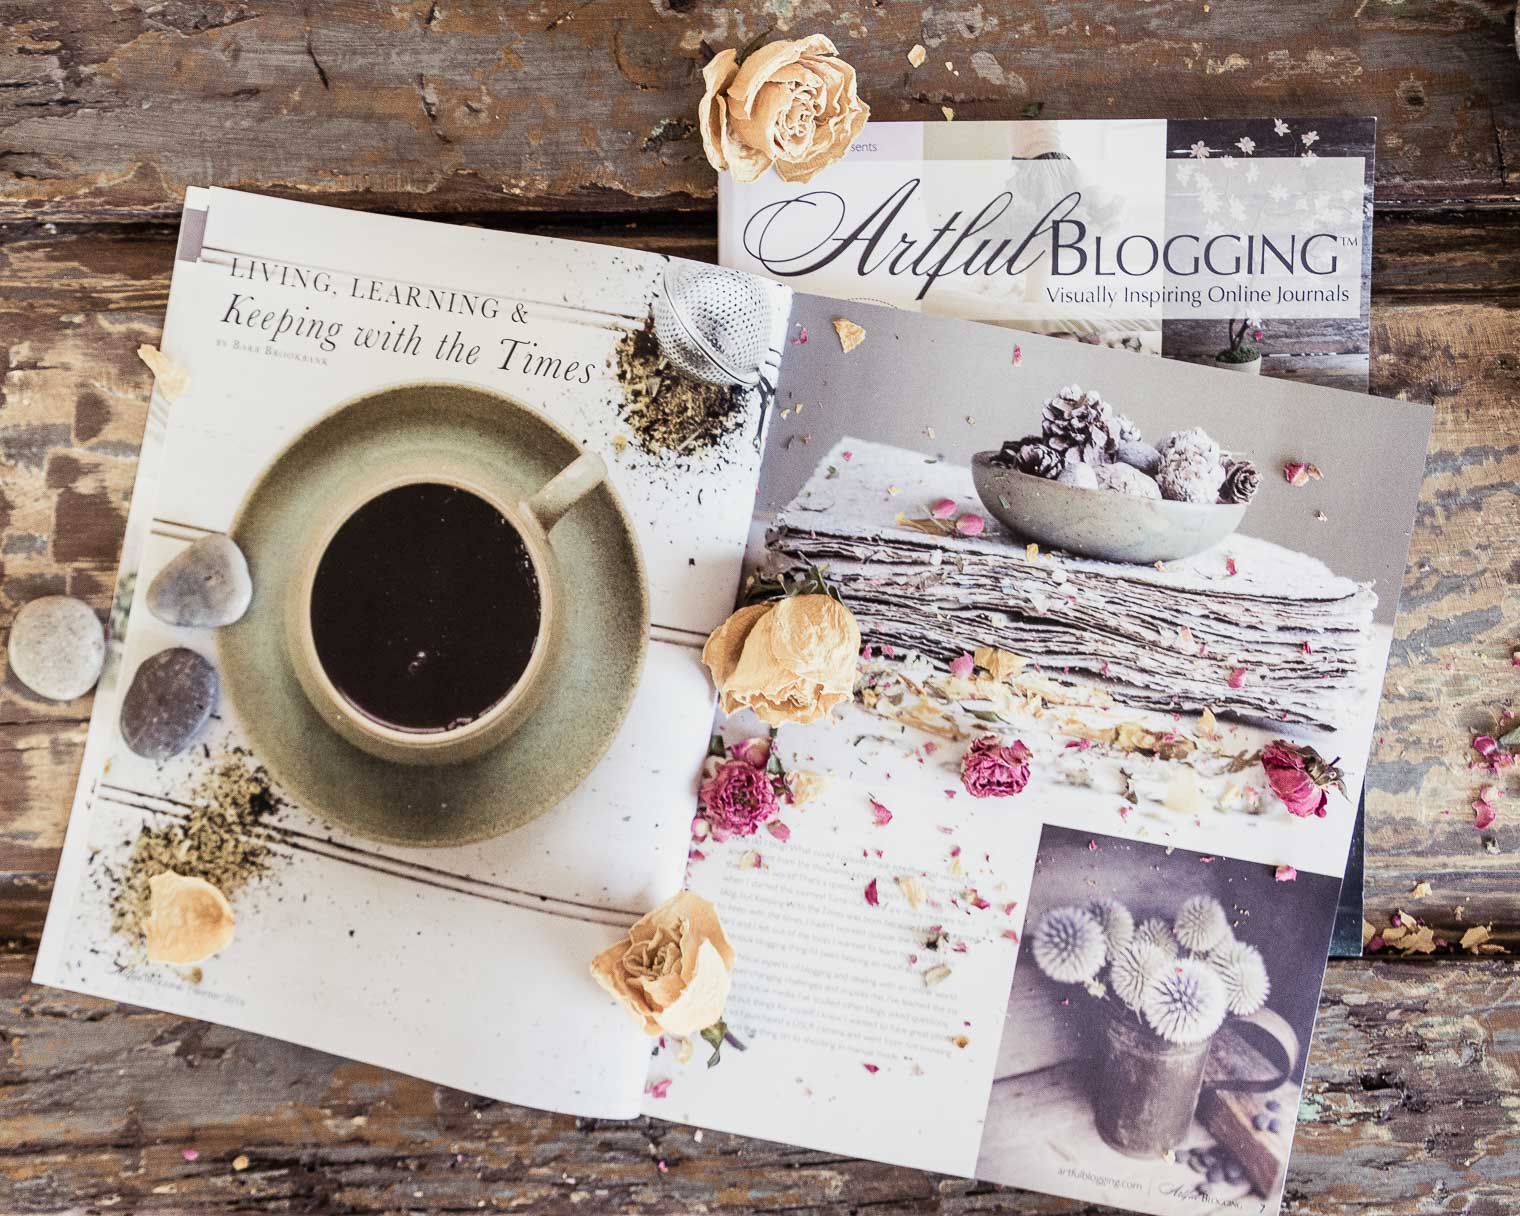 Artful Blogging Magazine, Barb Brookbank, Keeping With the Times, giveaway